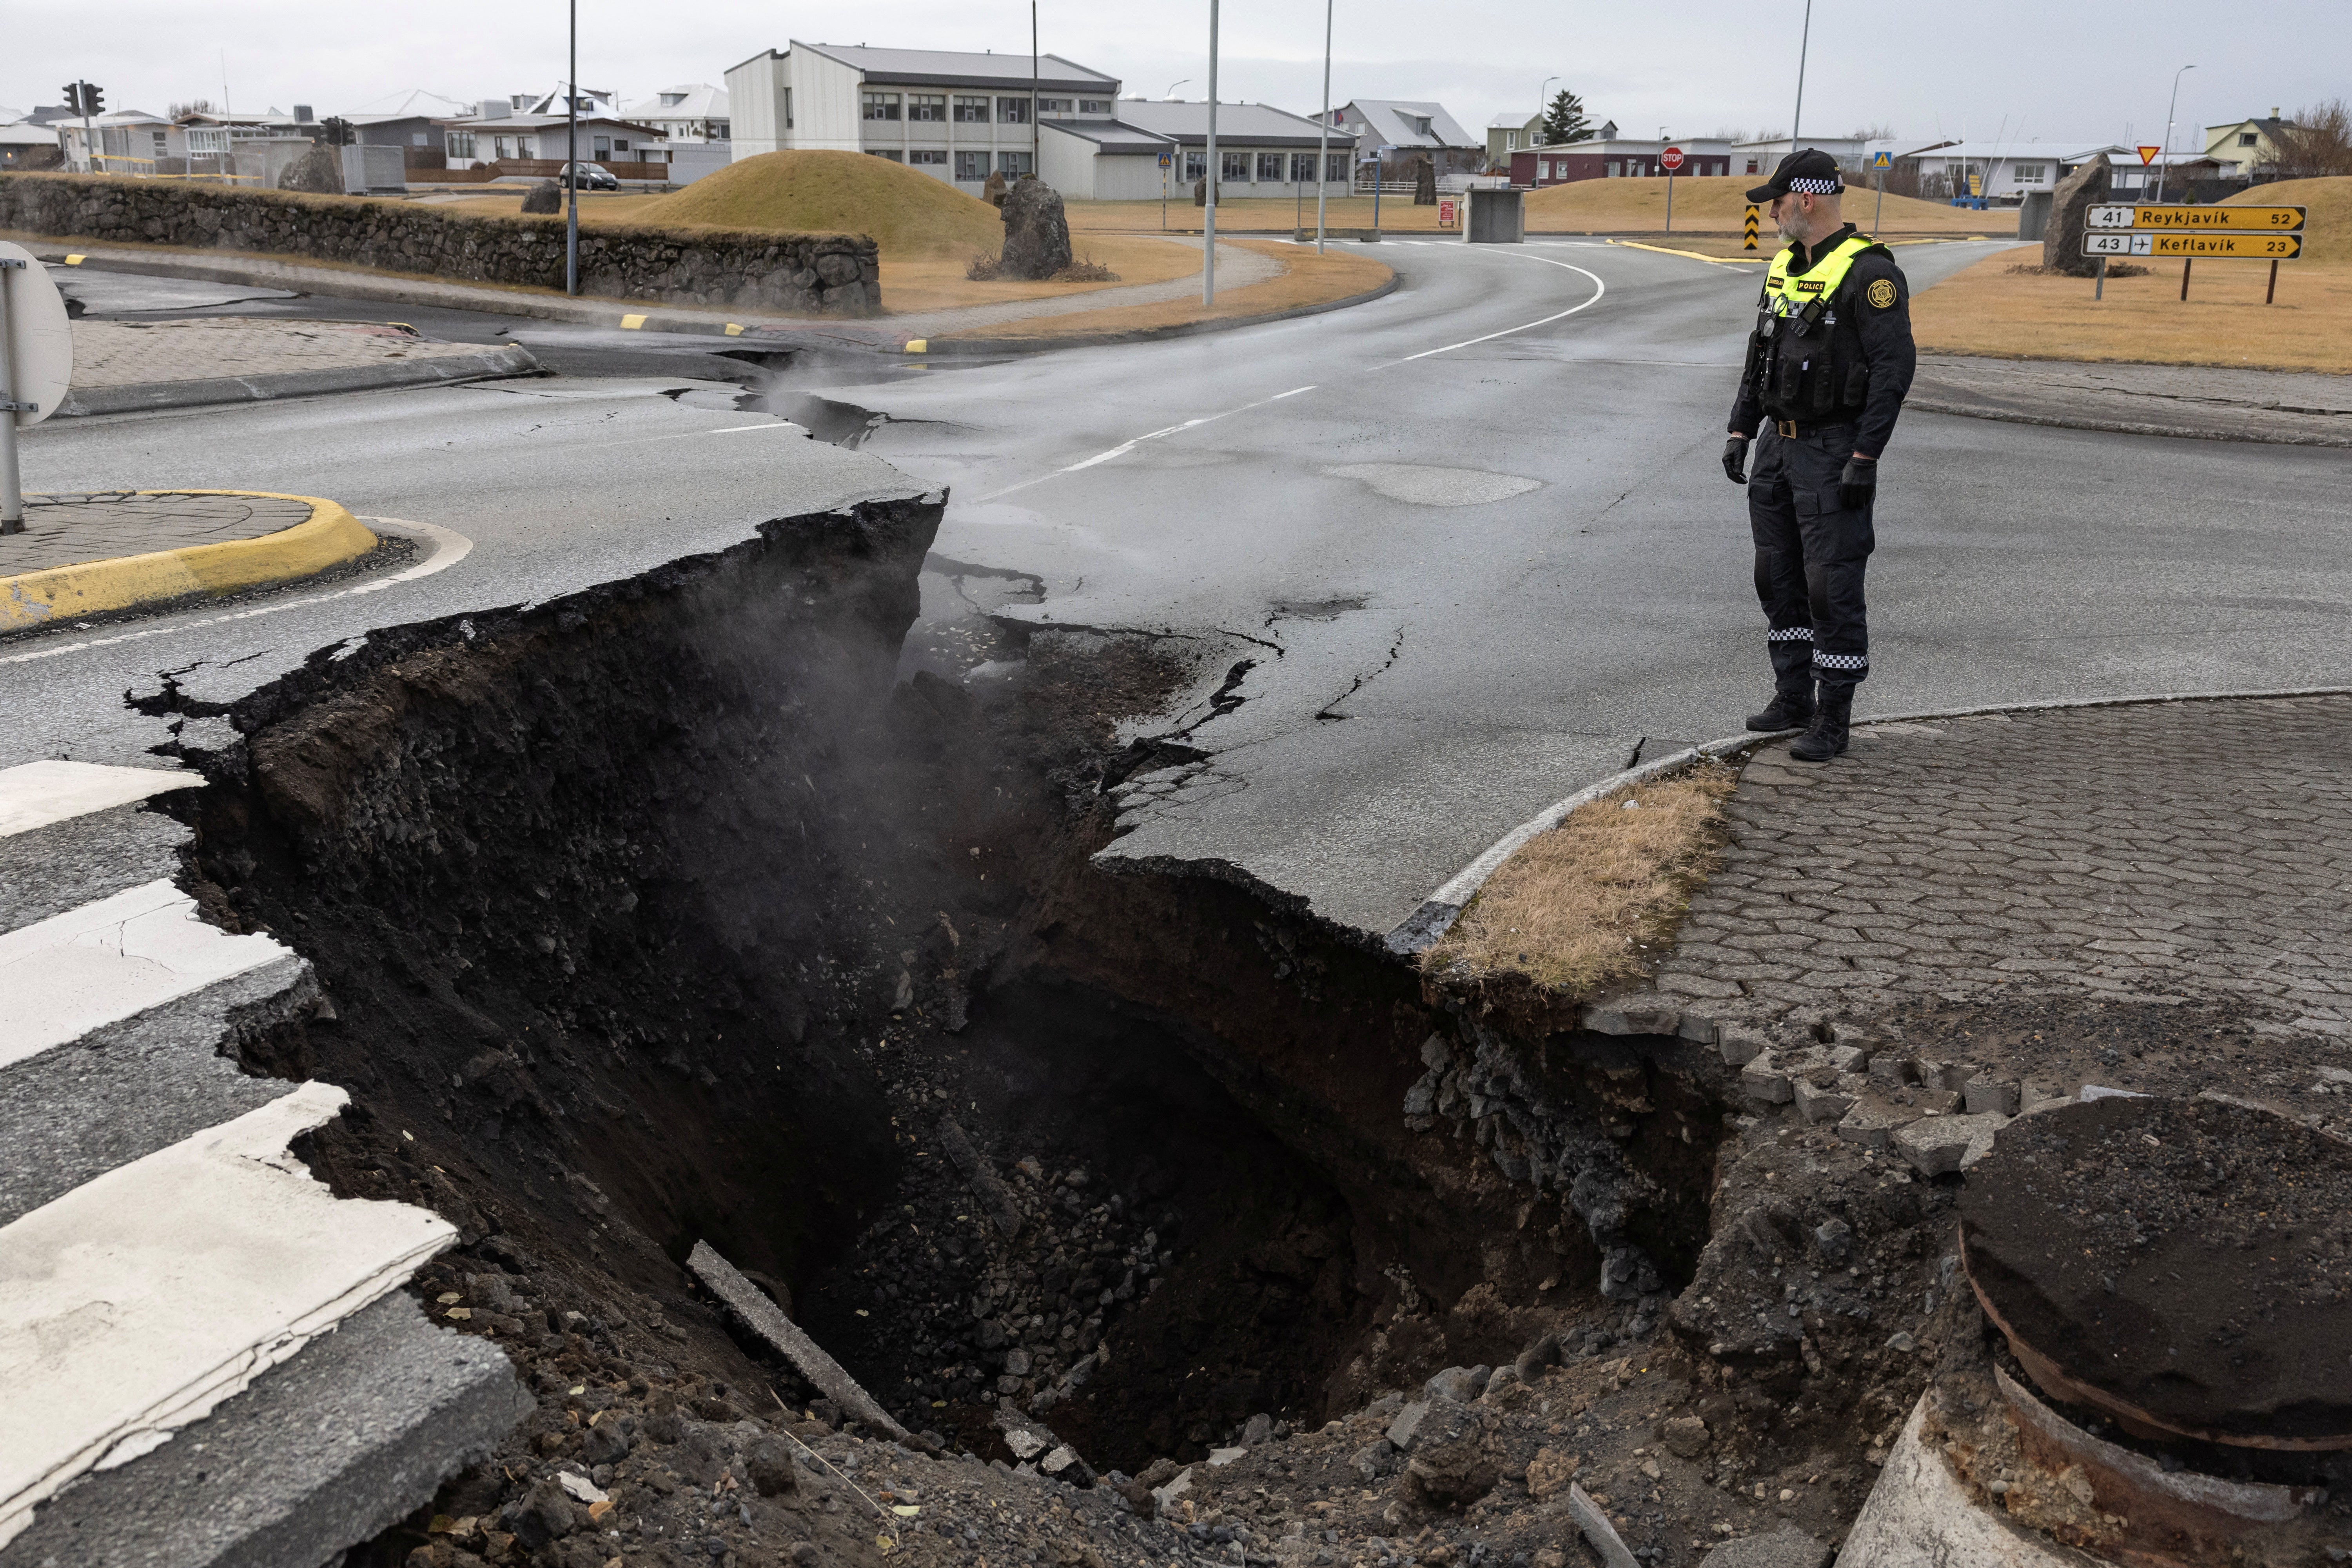 A police officer stands over one of the craters that opened up in the town